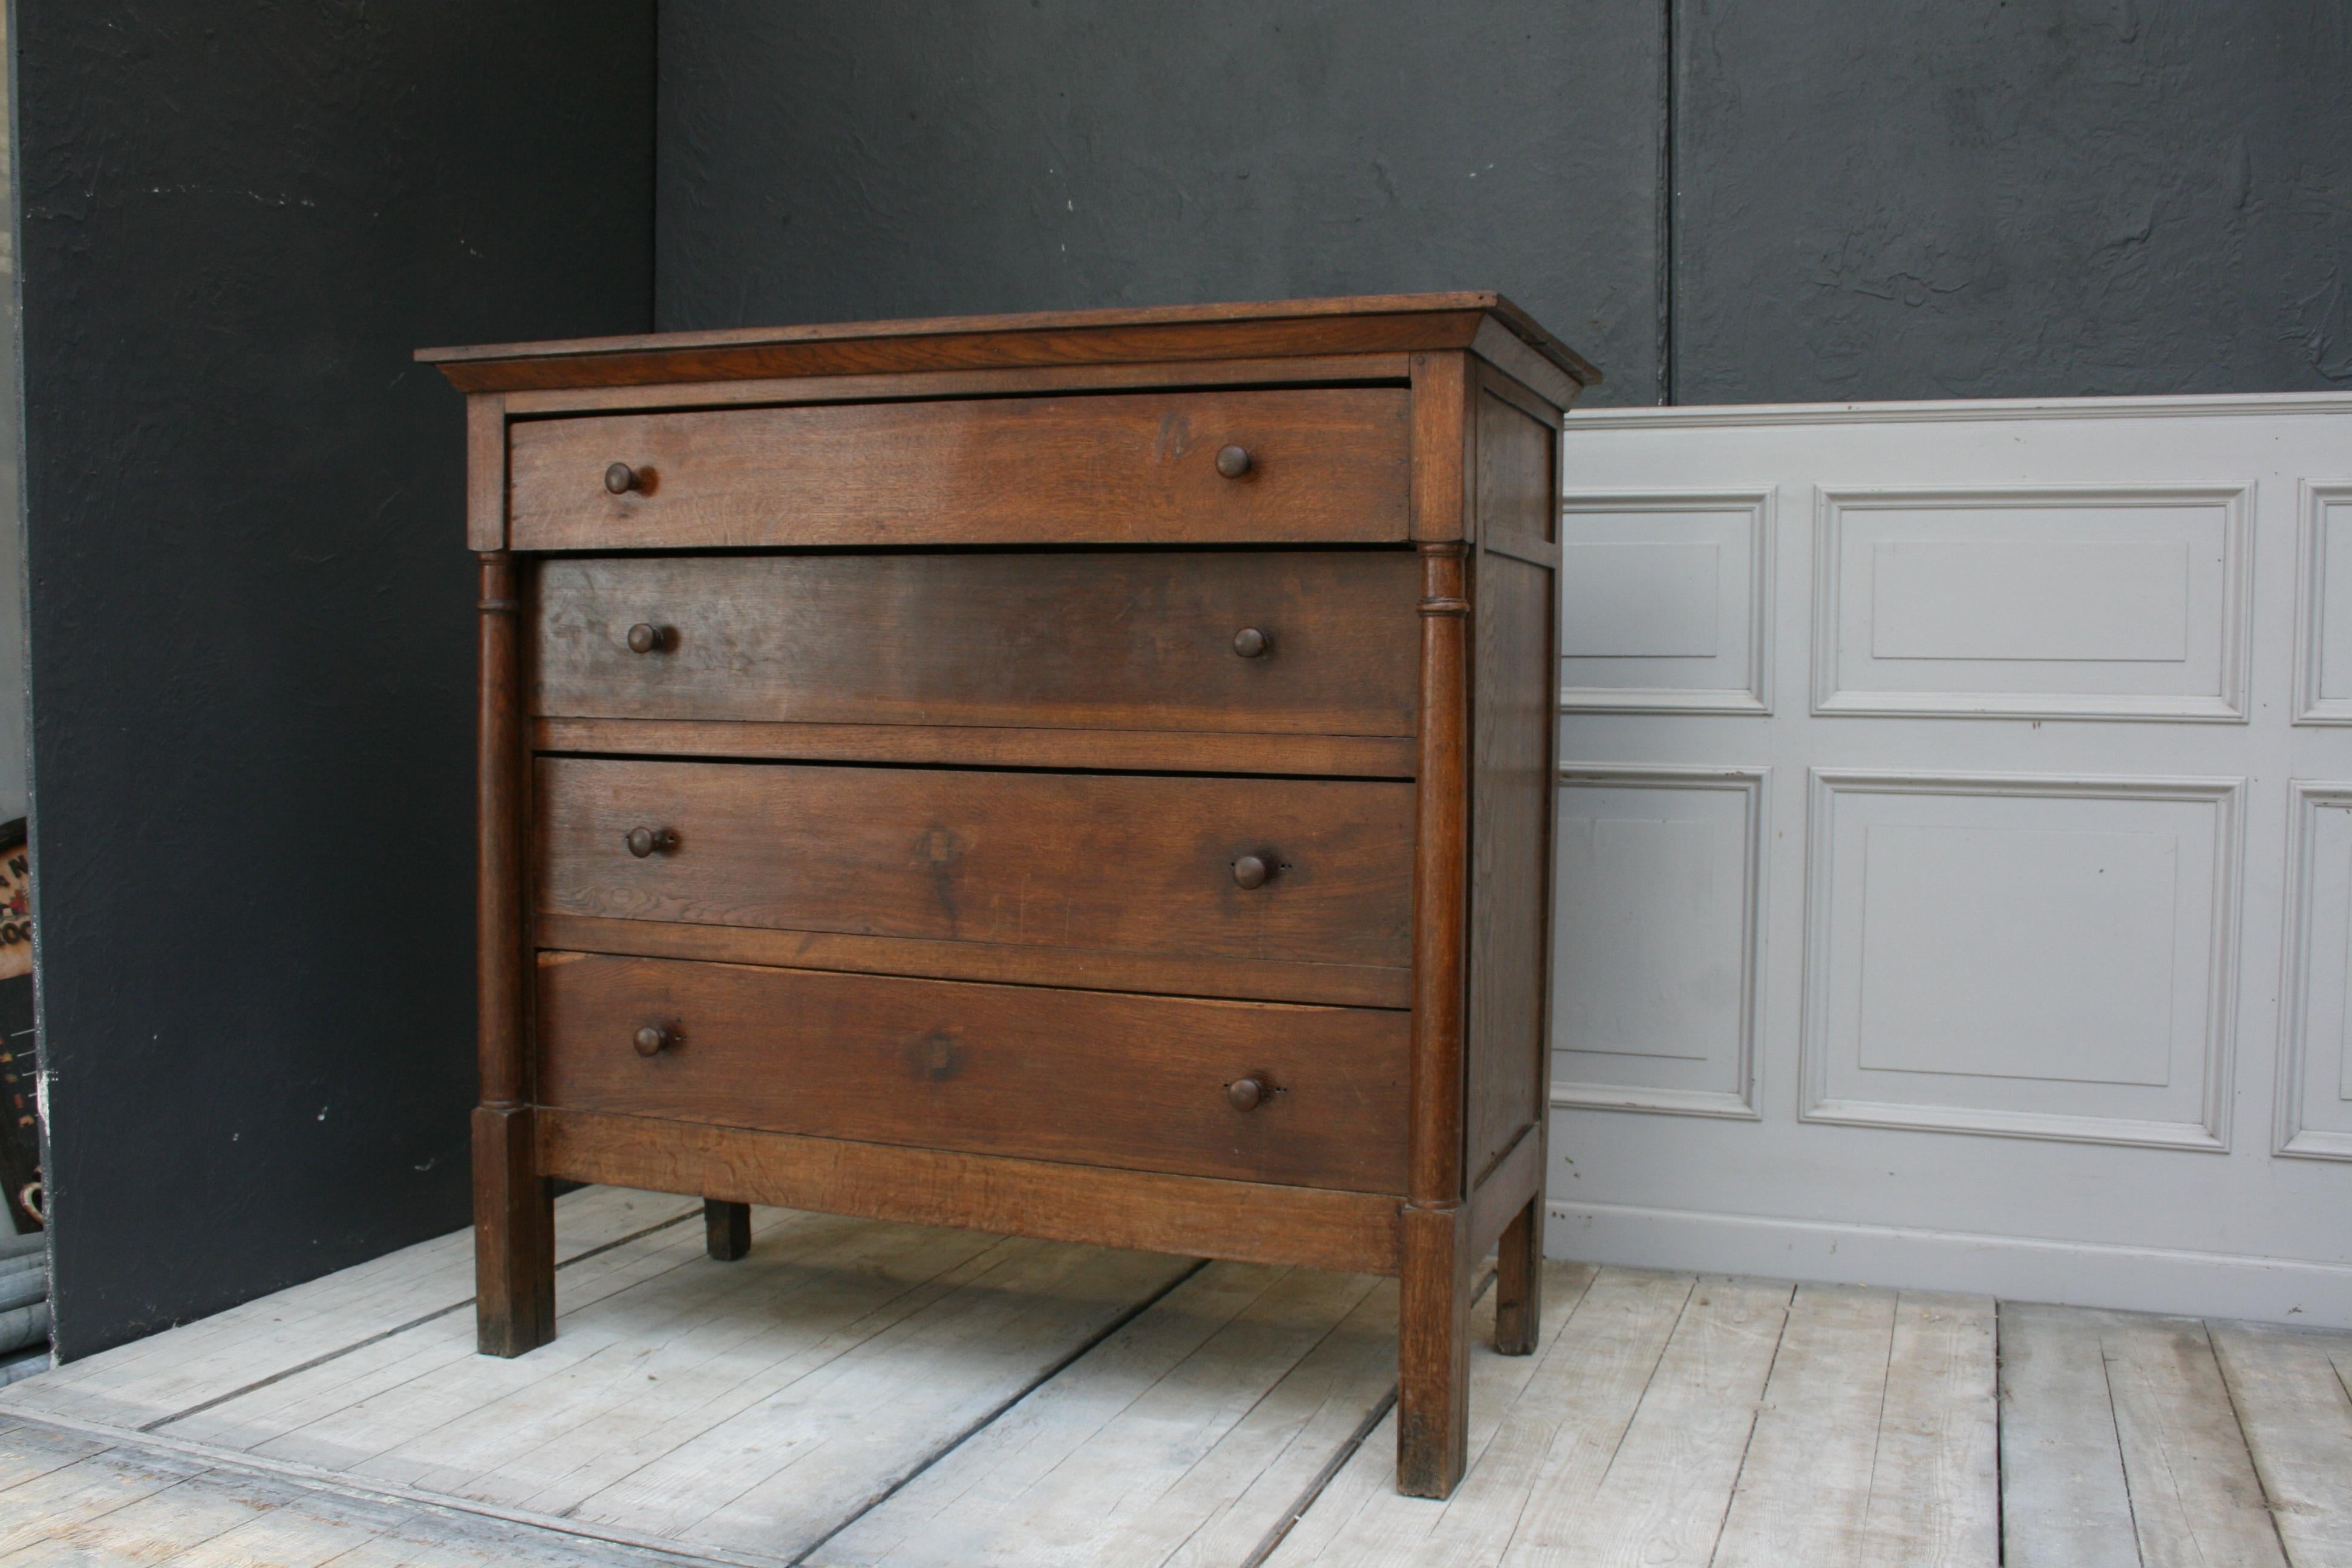 Empire men’s / high chest with four drawers. Wooden buttons instead of the original fittings. Approximately 1820th.
Dimensions: 124 cm high, 132 cm wide, 61 cm deep.
 